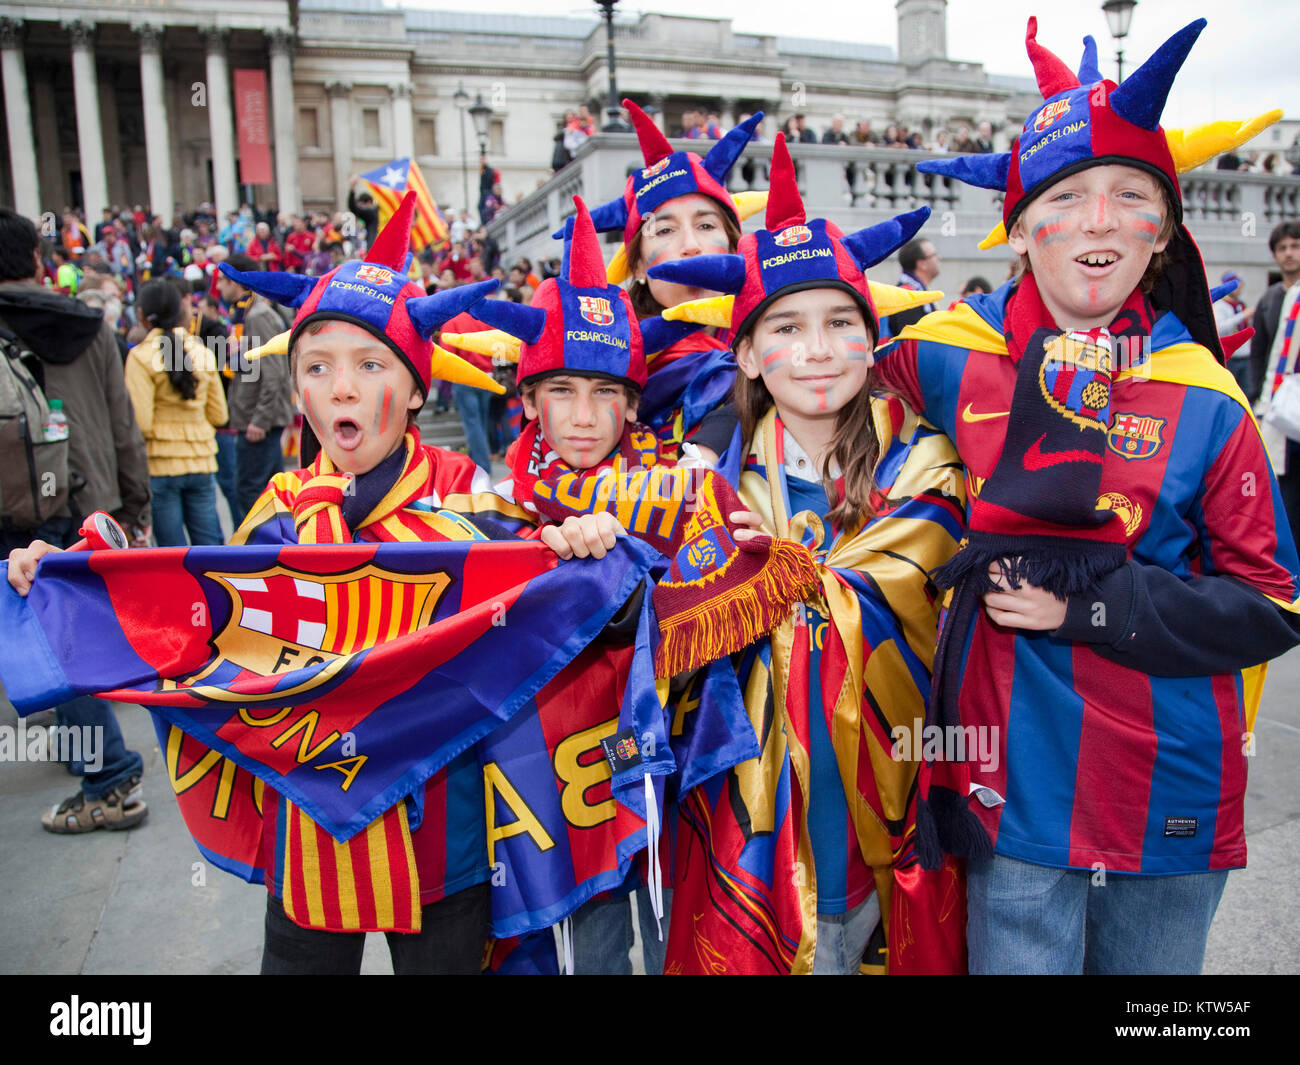 Friendly Barca fans in Trafalgar Square before the kick-off of the Champions League Final between FC Barcelona and Manchester United. Young fans. Stock Photo